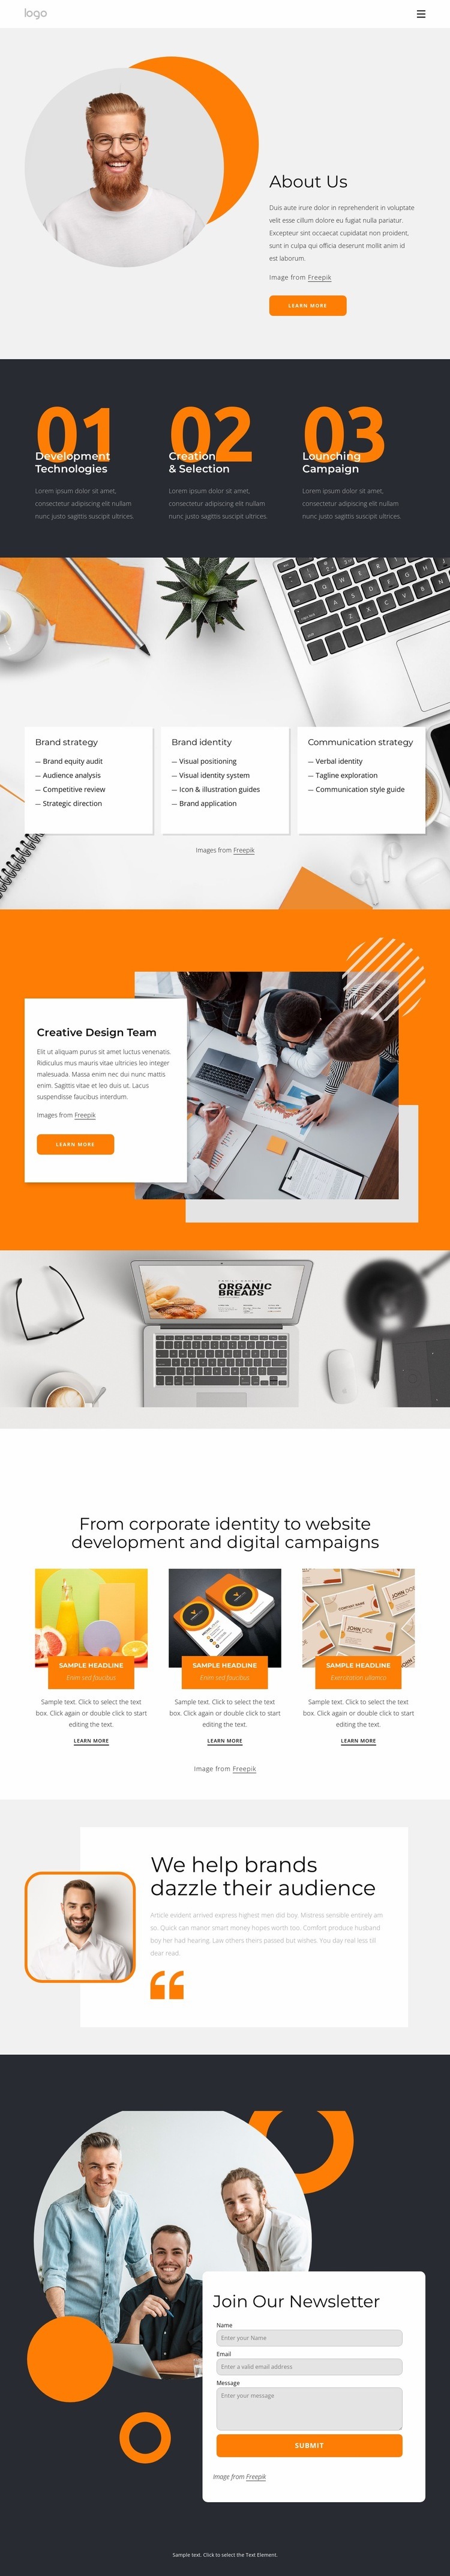 We do everything for you Homepage Design